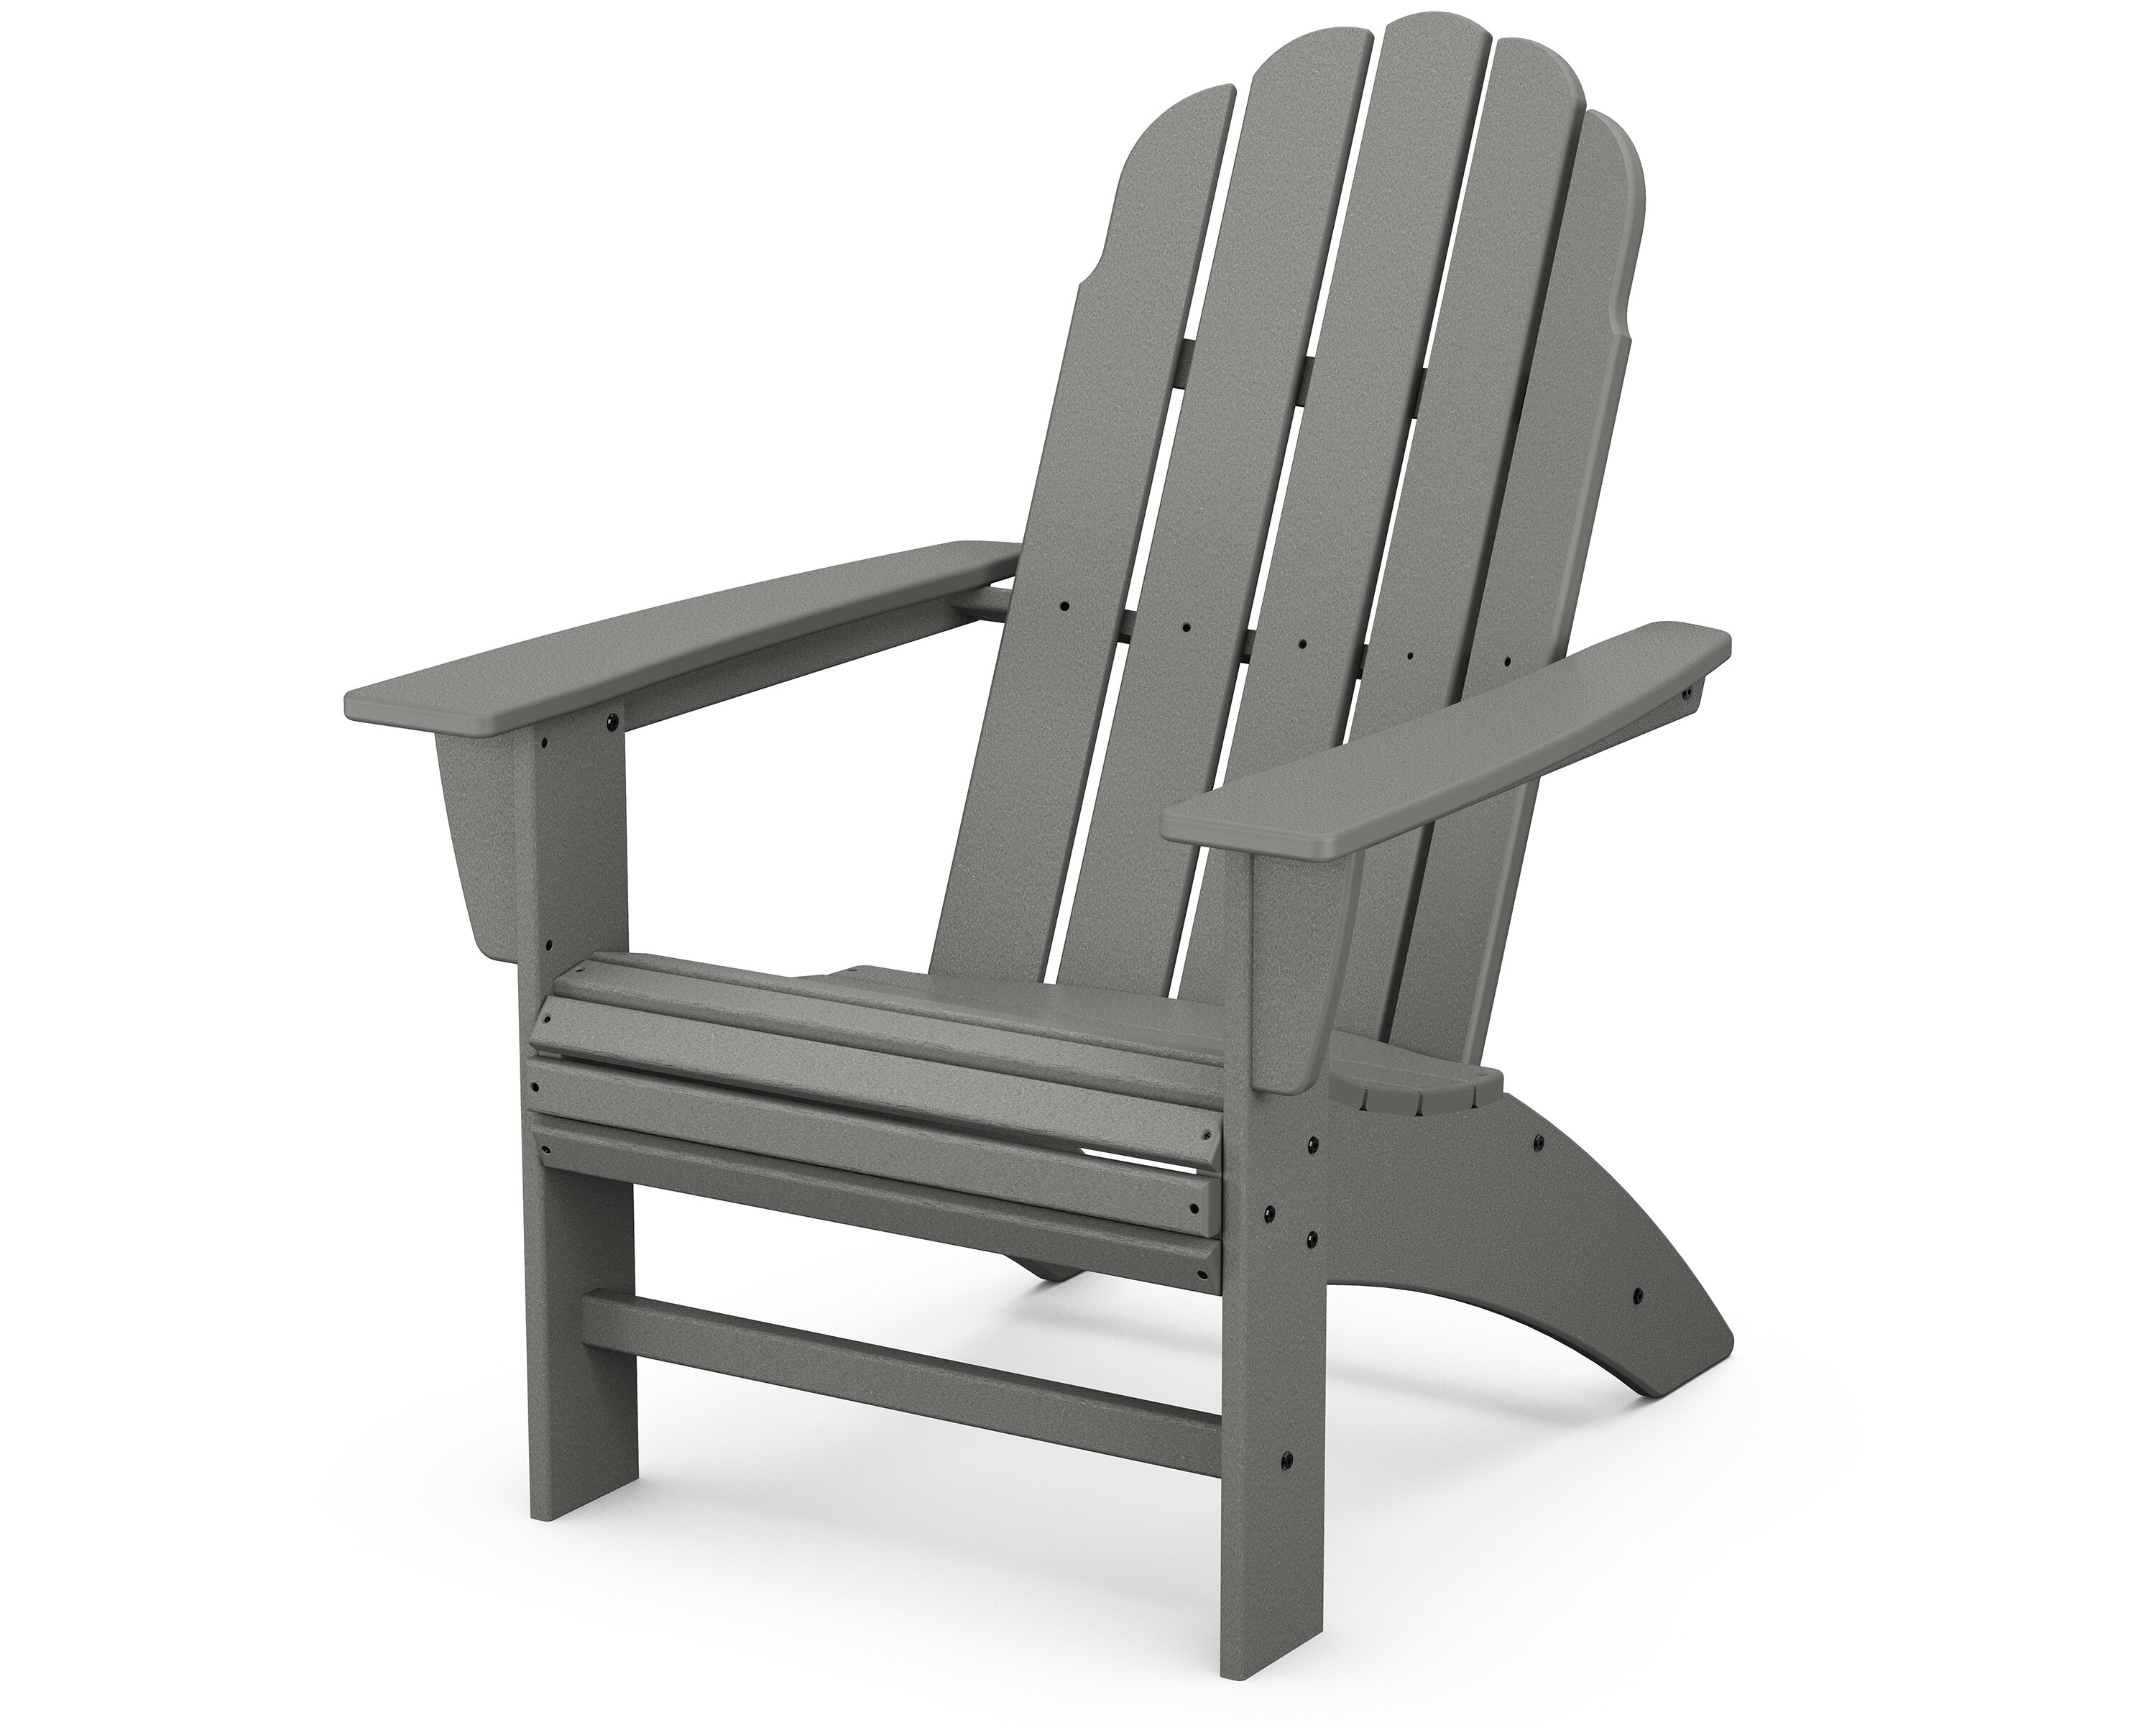 Adirondack Folding Chair by Leisure Line FREE SHIPPING Gray BRAND NEW 